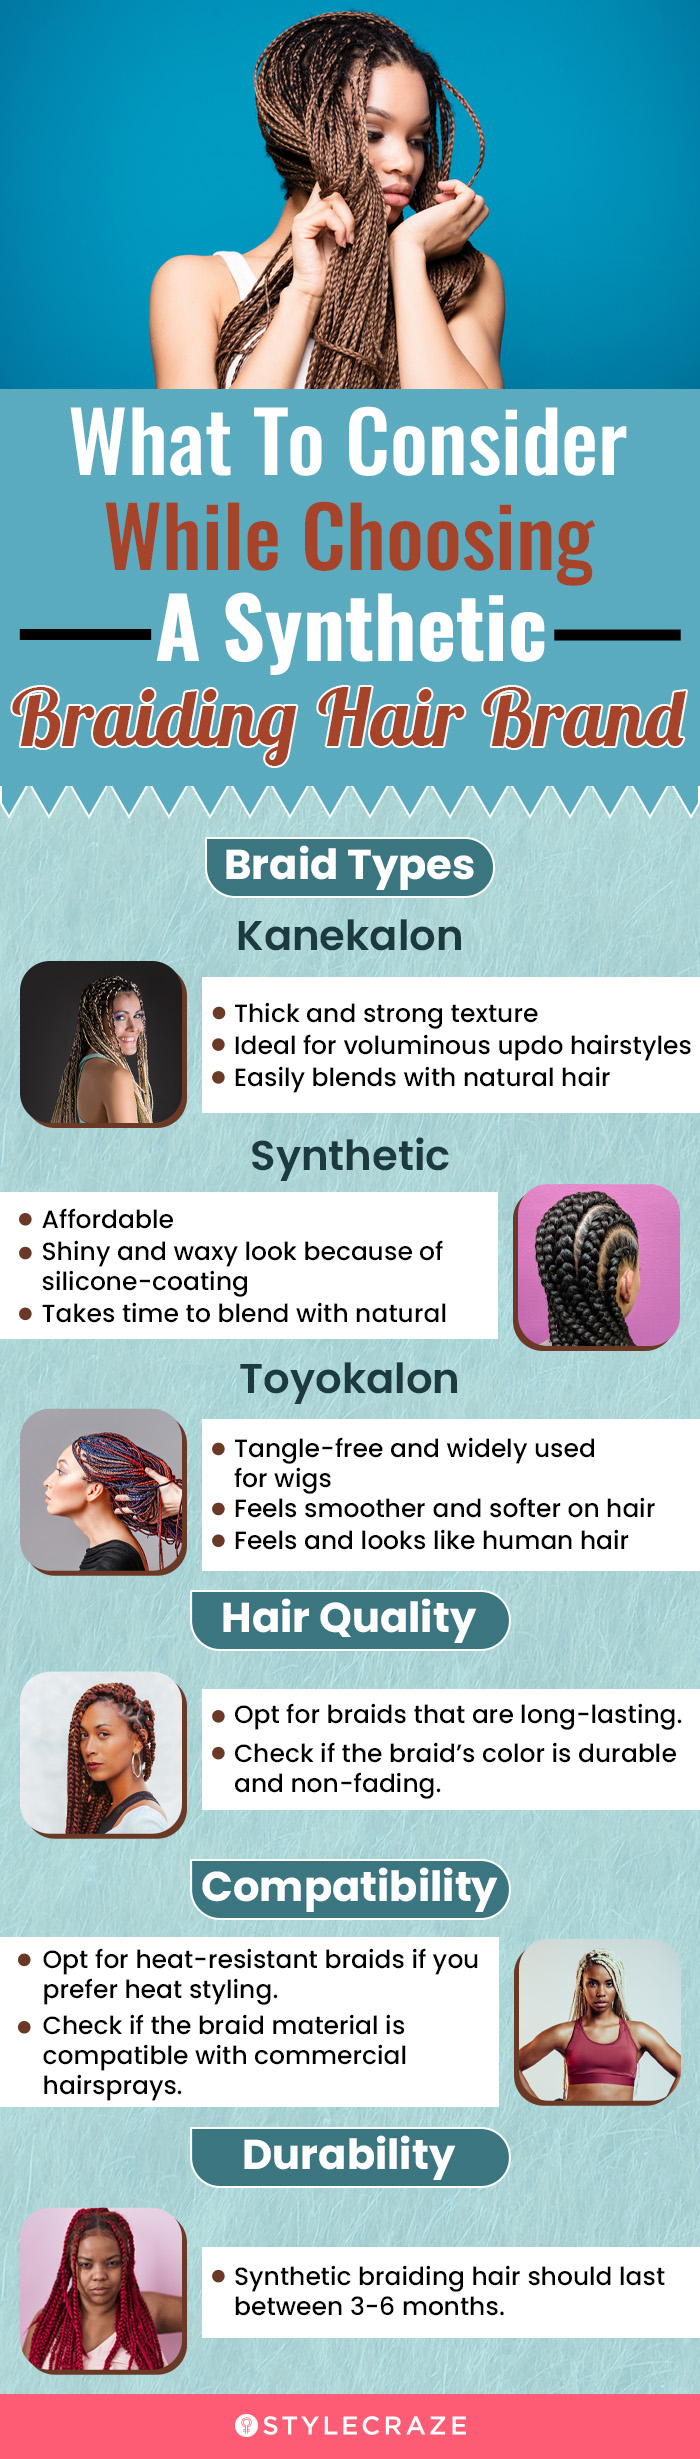 What To Consider While Choosing A Synthetic Braiding Hair [infographic]